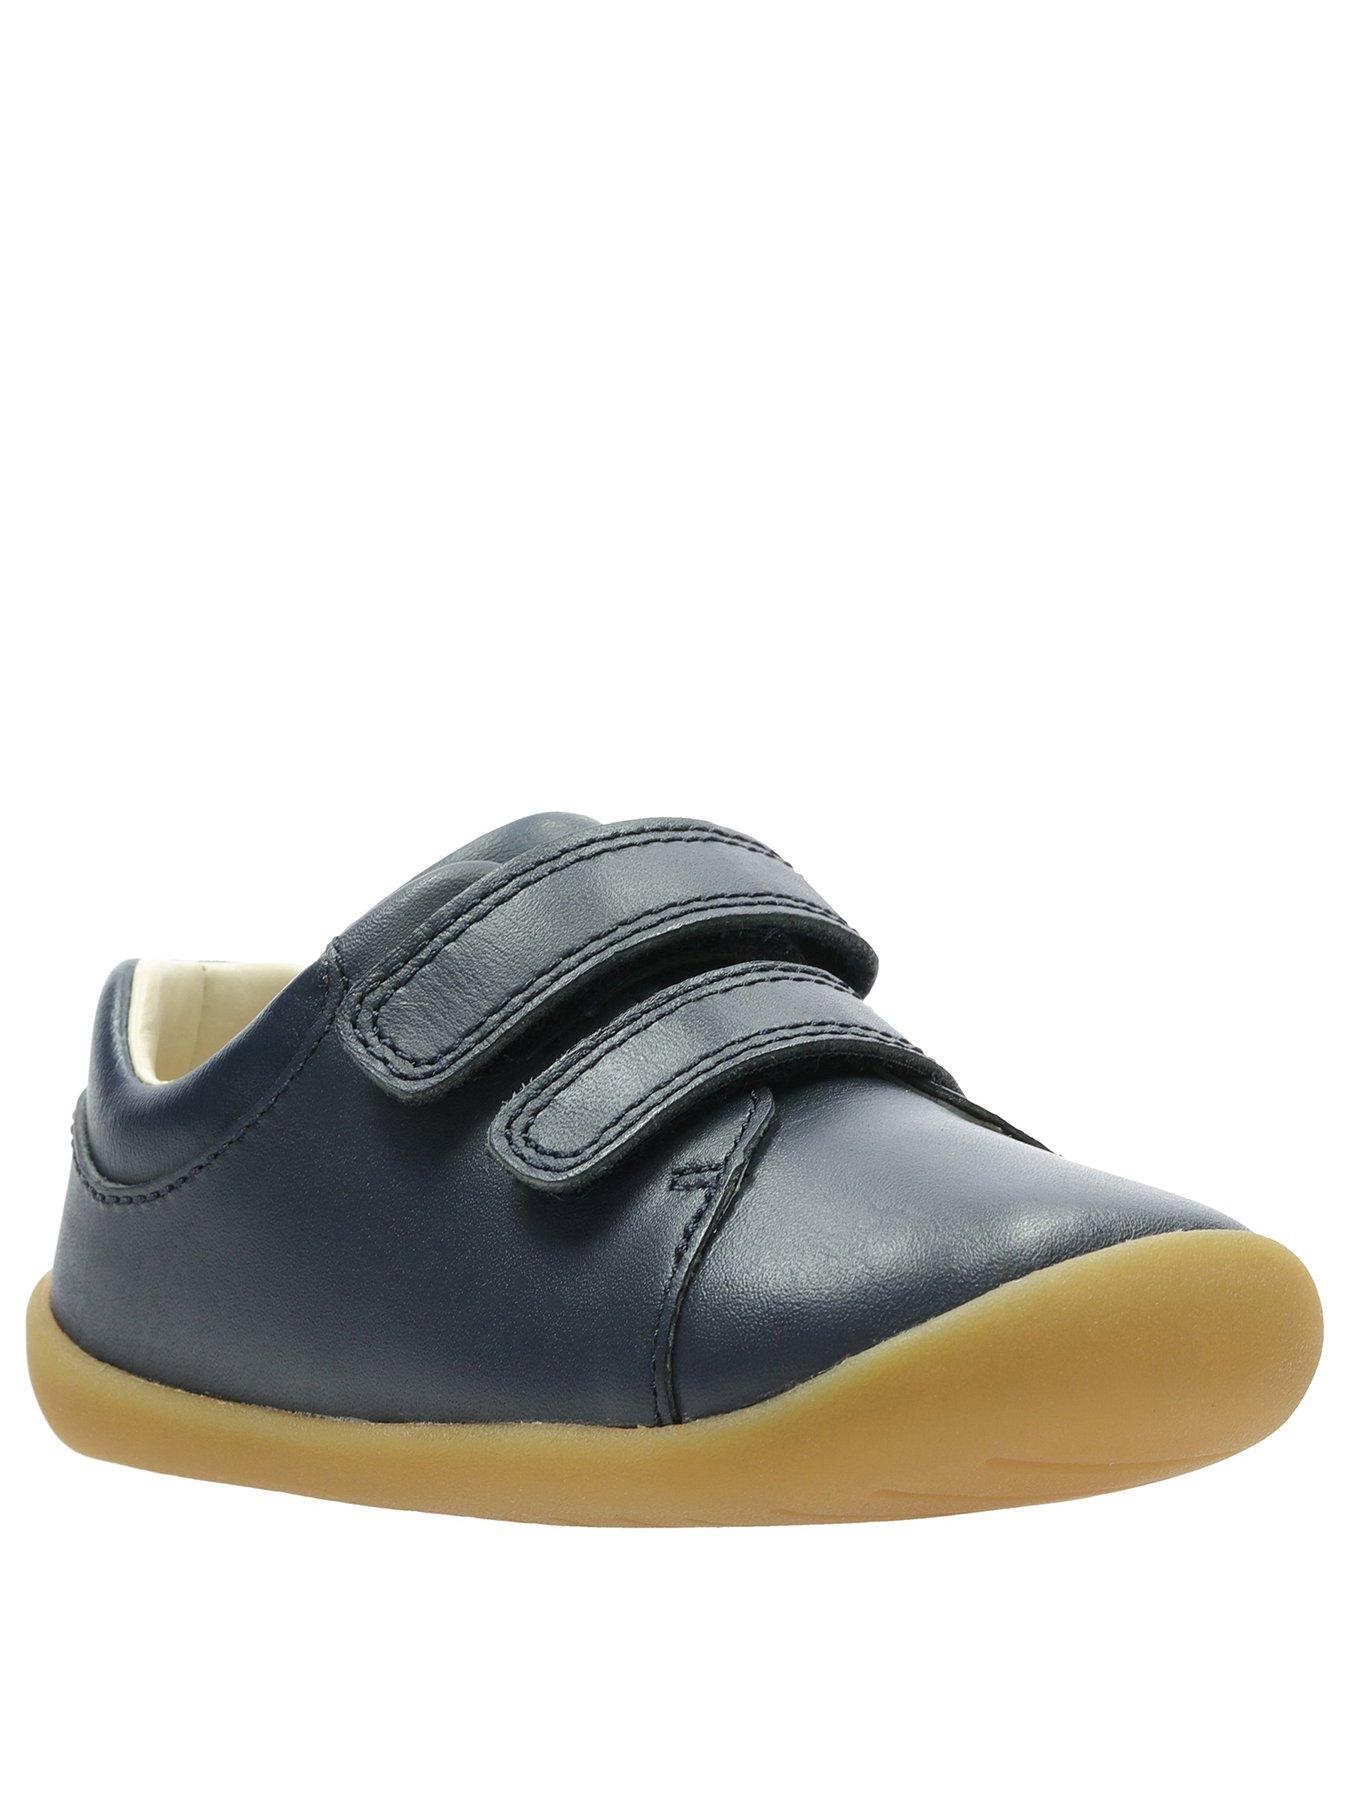 clarks baby shoes uk